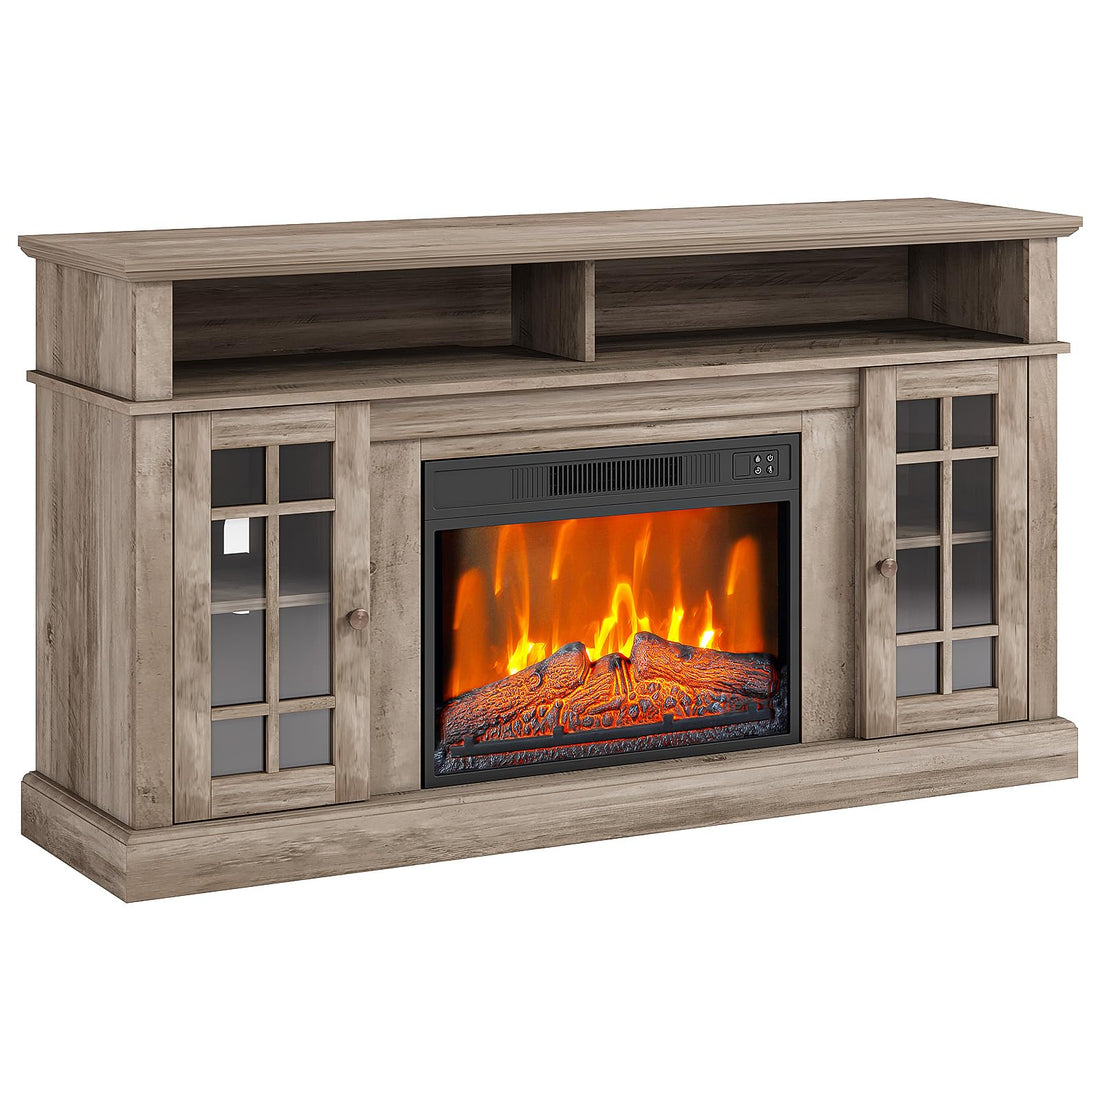 58" TV Stand with 23" Electric Fireplace, Remote Control